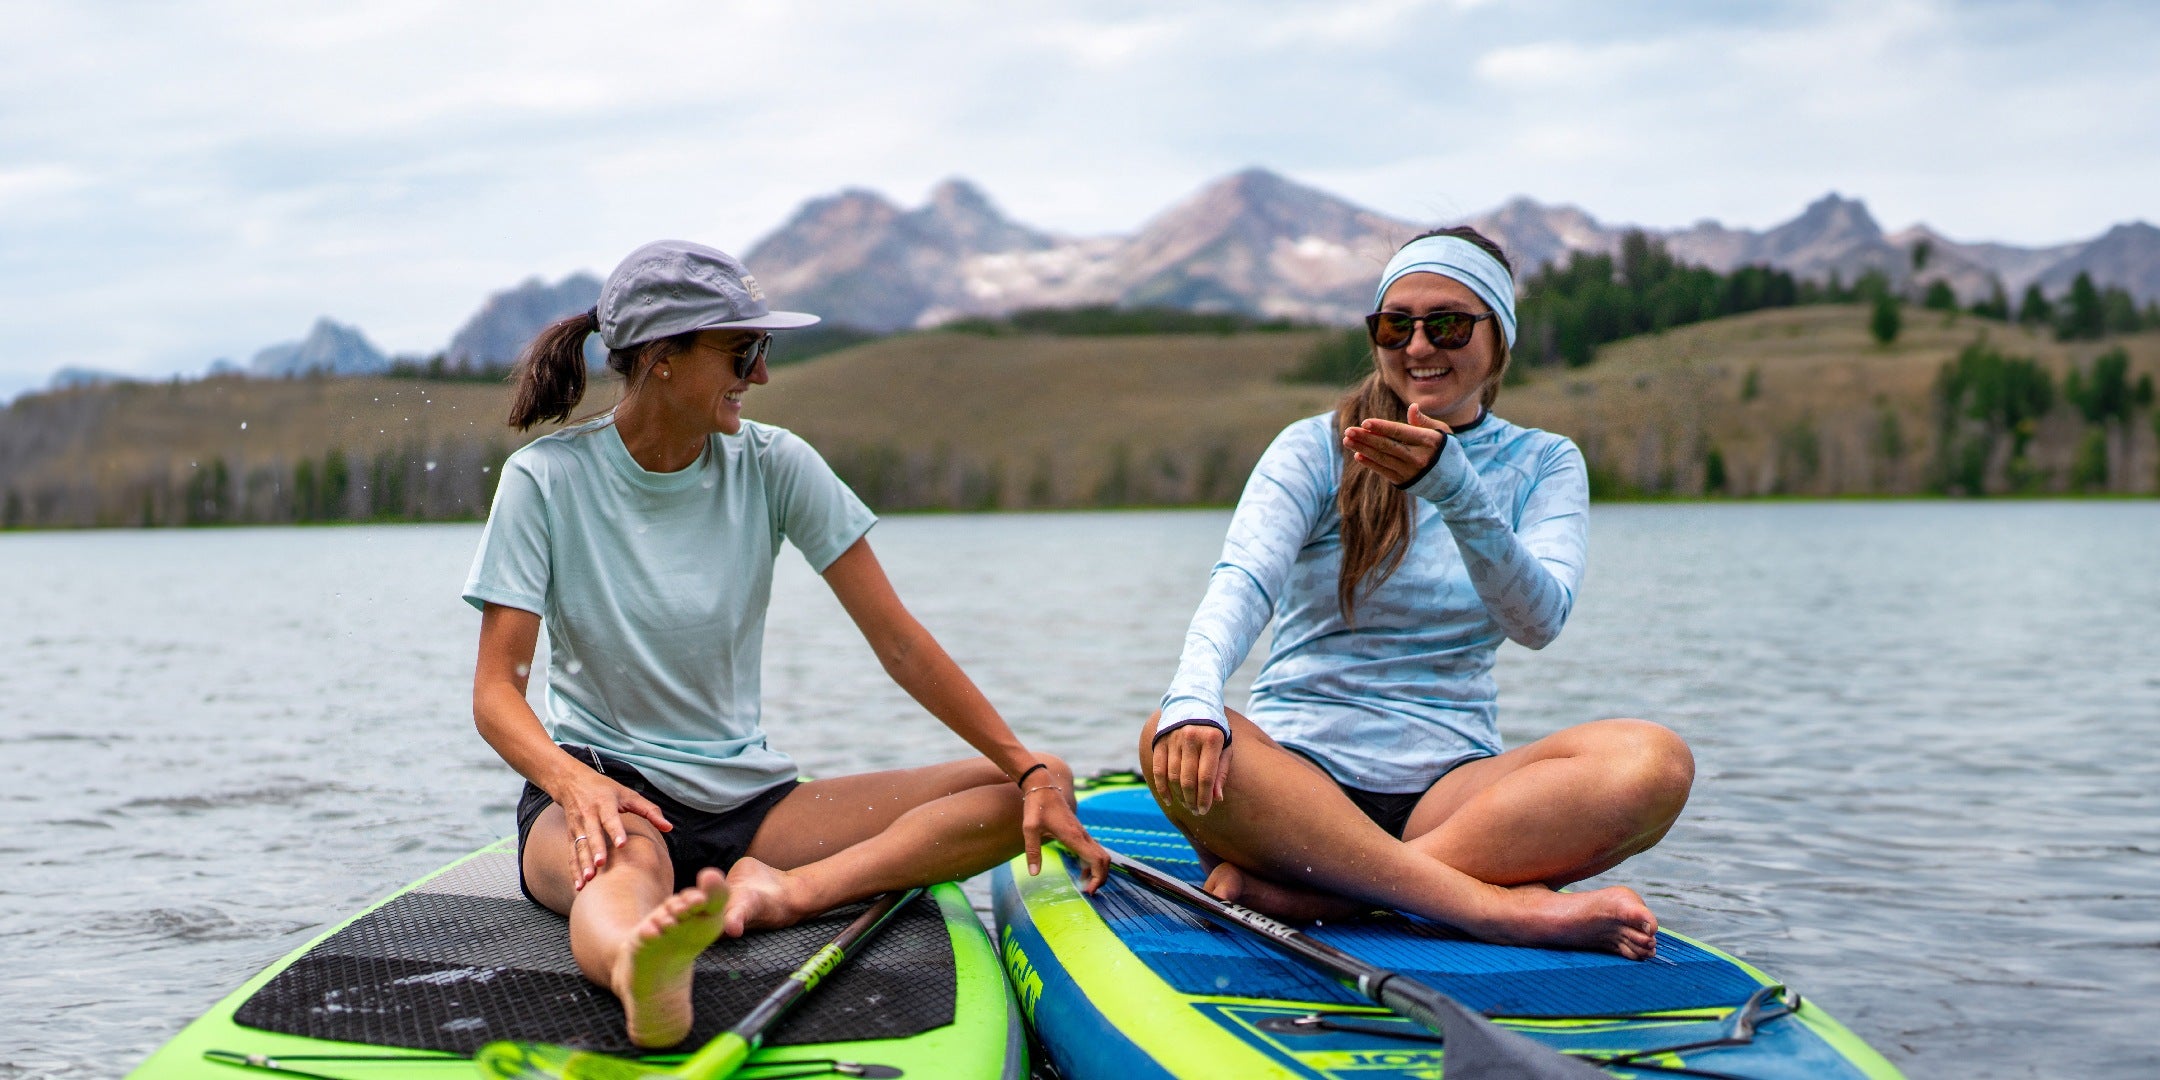 Blackstrap Women's Water Sun Protection and Technical Apparel